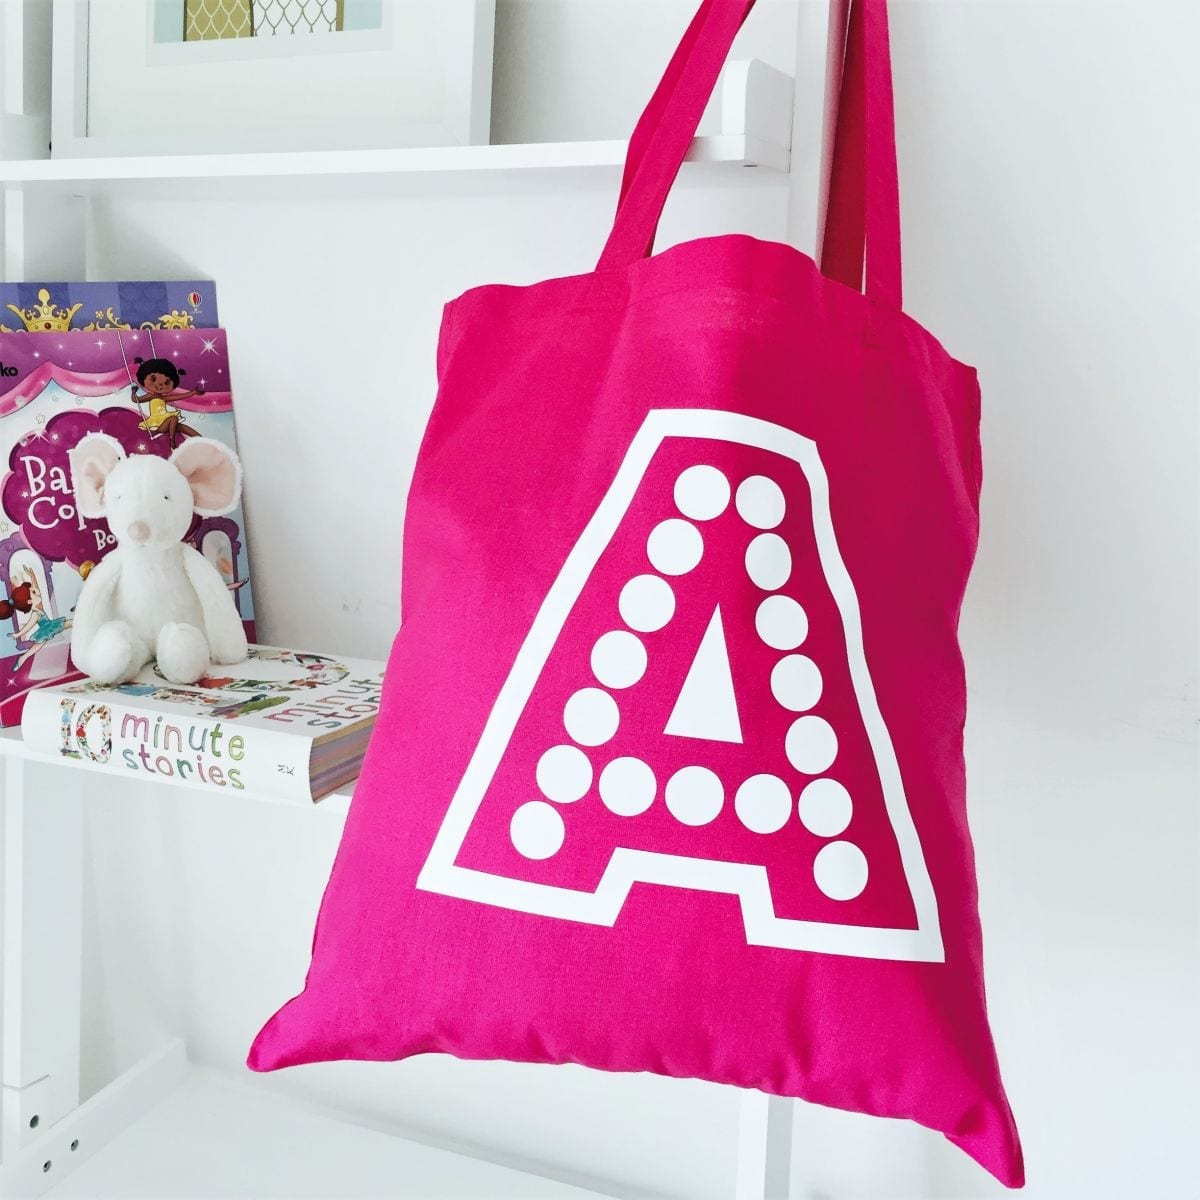 Personalised Initial Cotton Tote Shopping Bag ⋆ Name It Labels